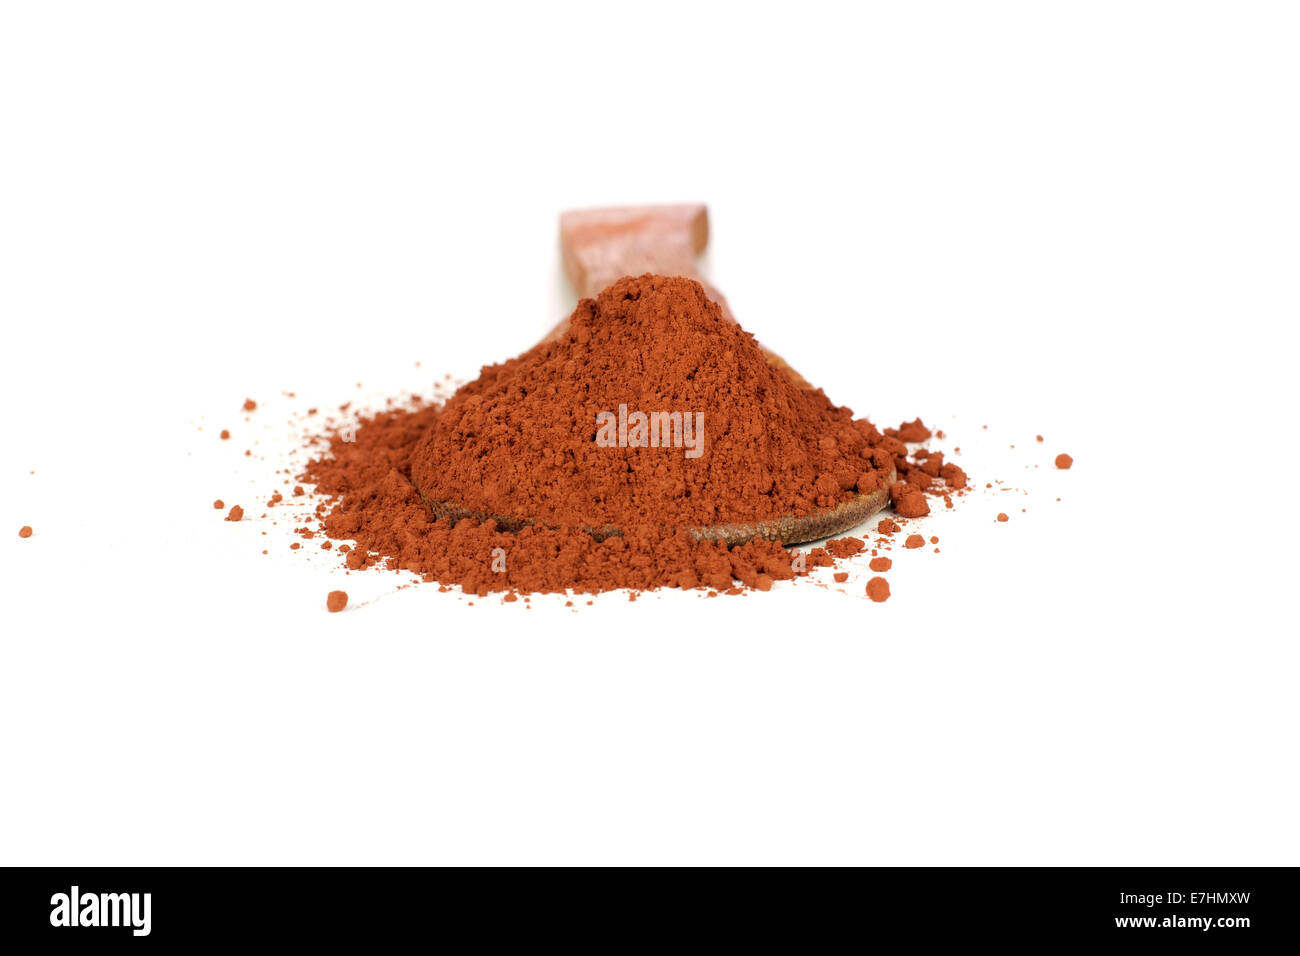 Spoon with cocoa powder isolated over white background Stock Photo